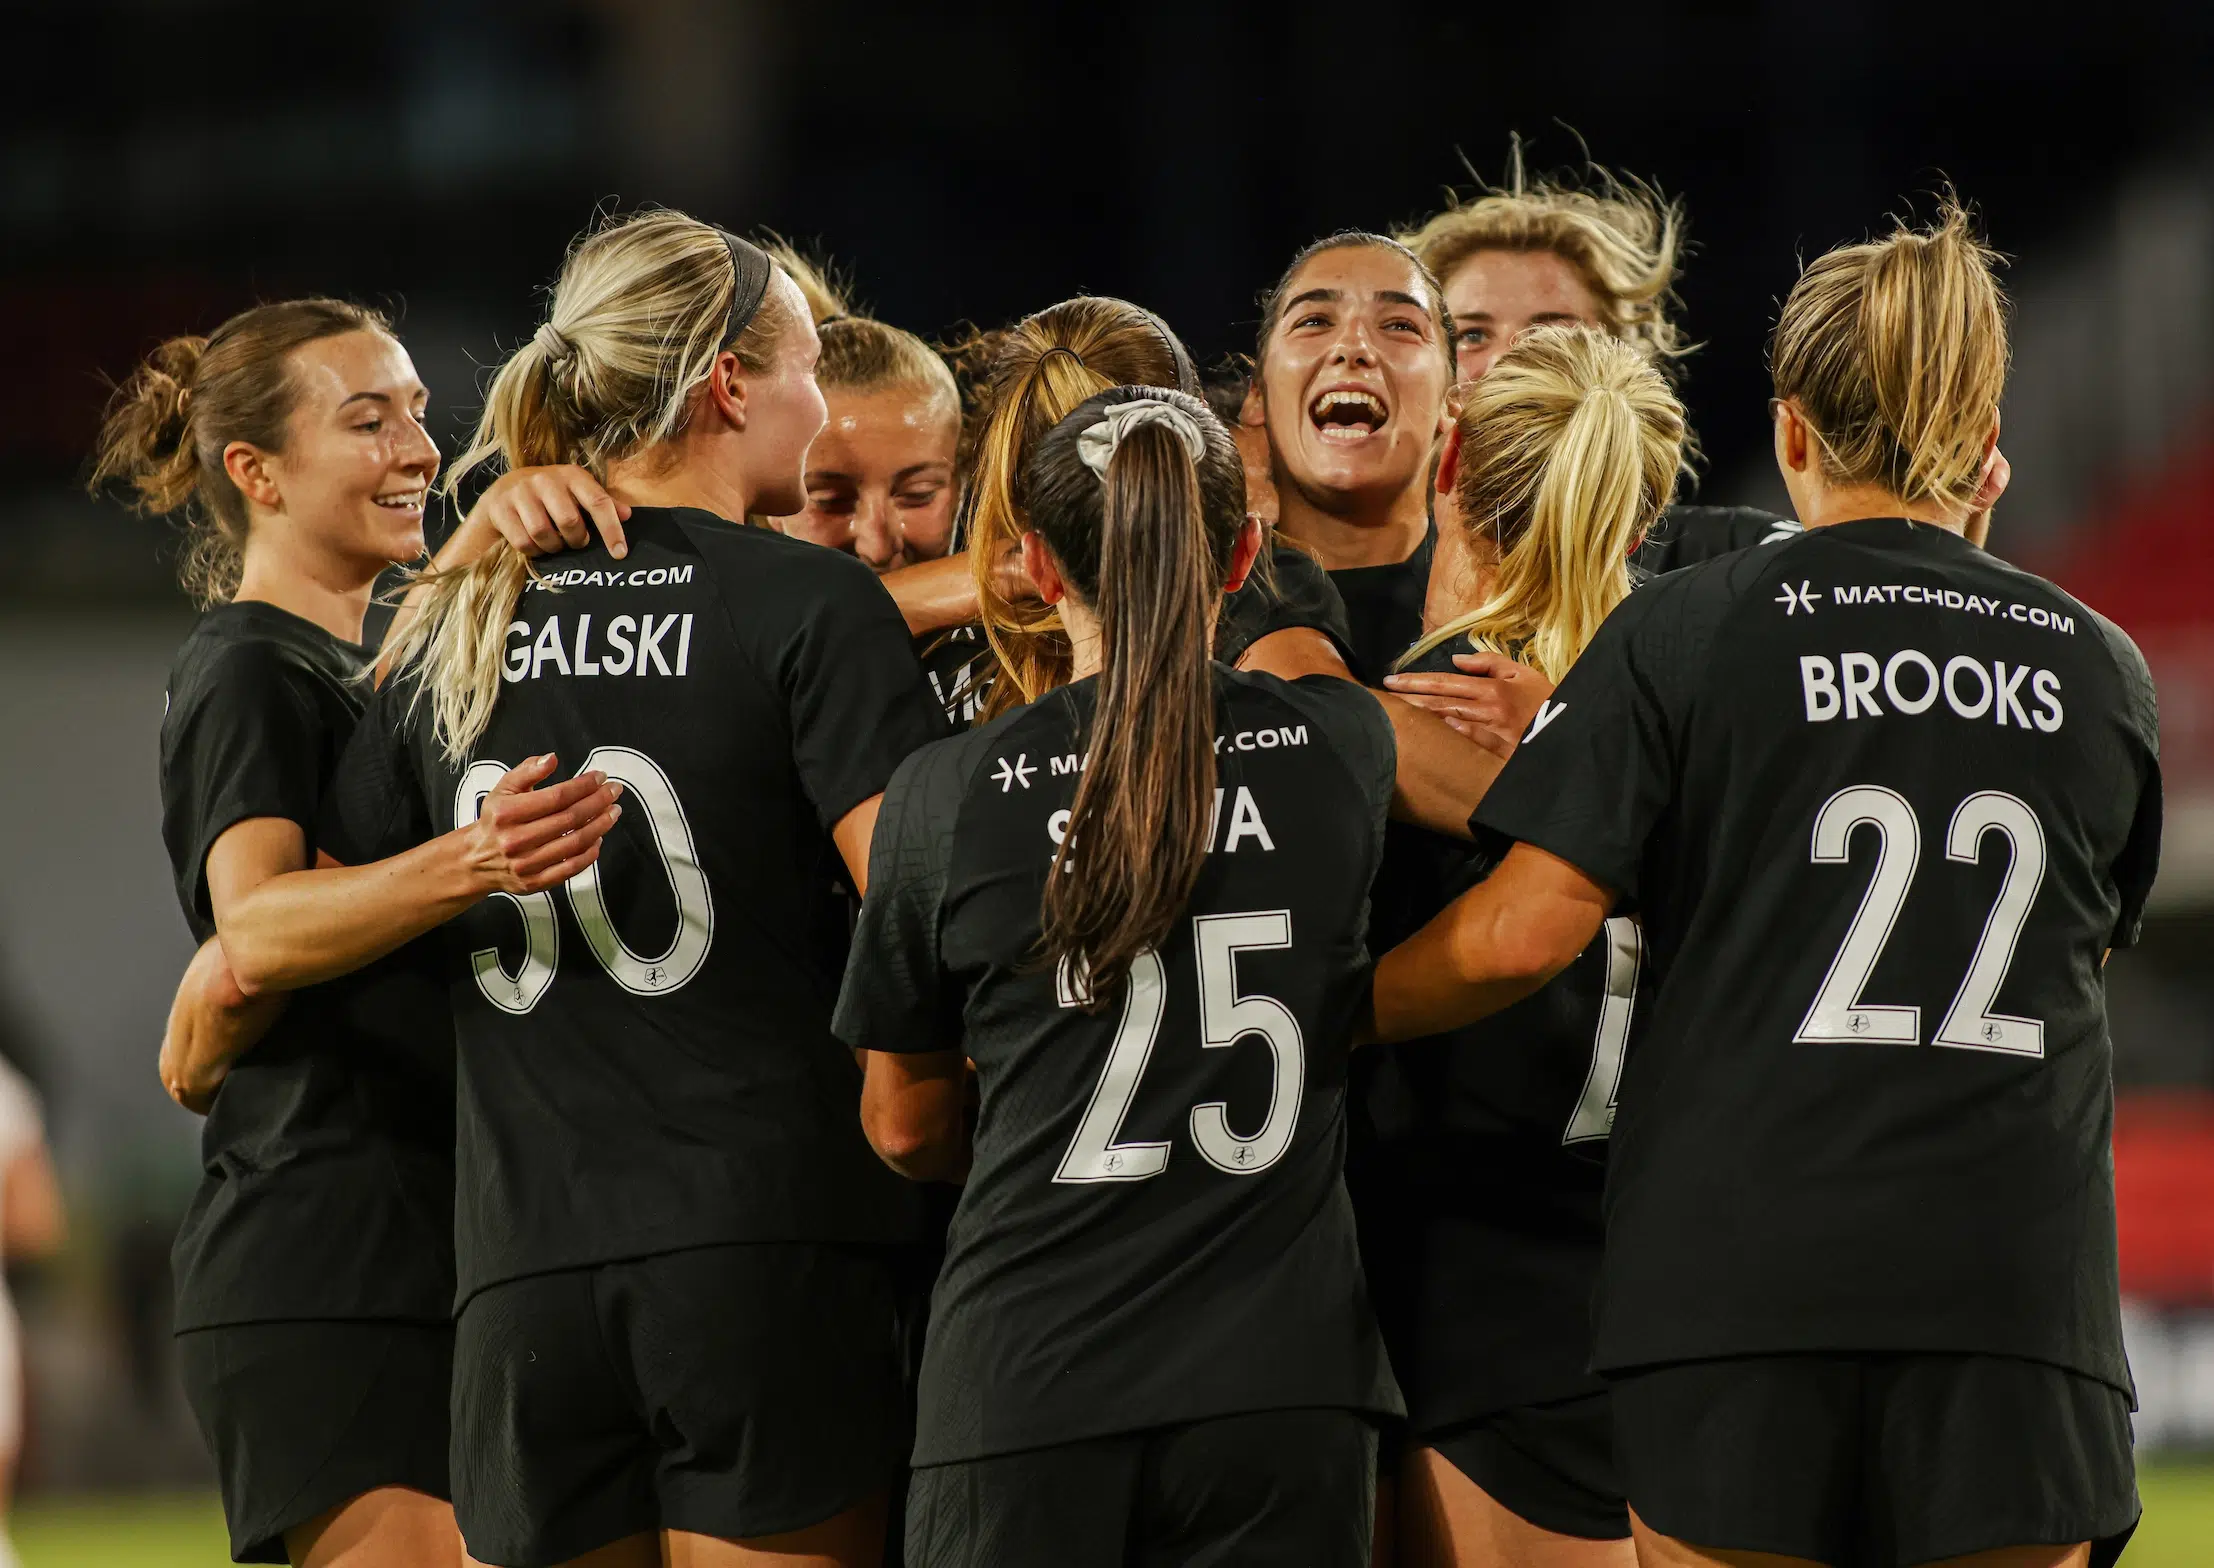 A group of soccer players wearing black jerseys hug and celebrate.